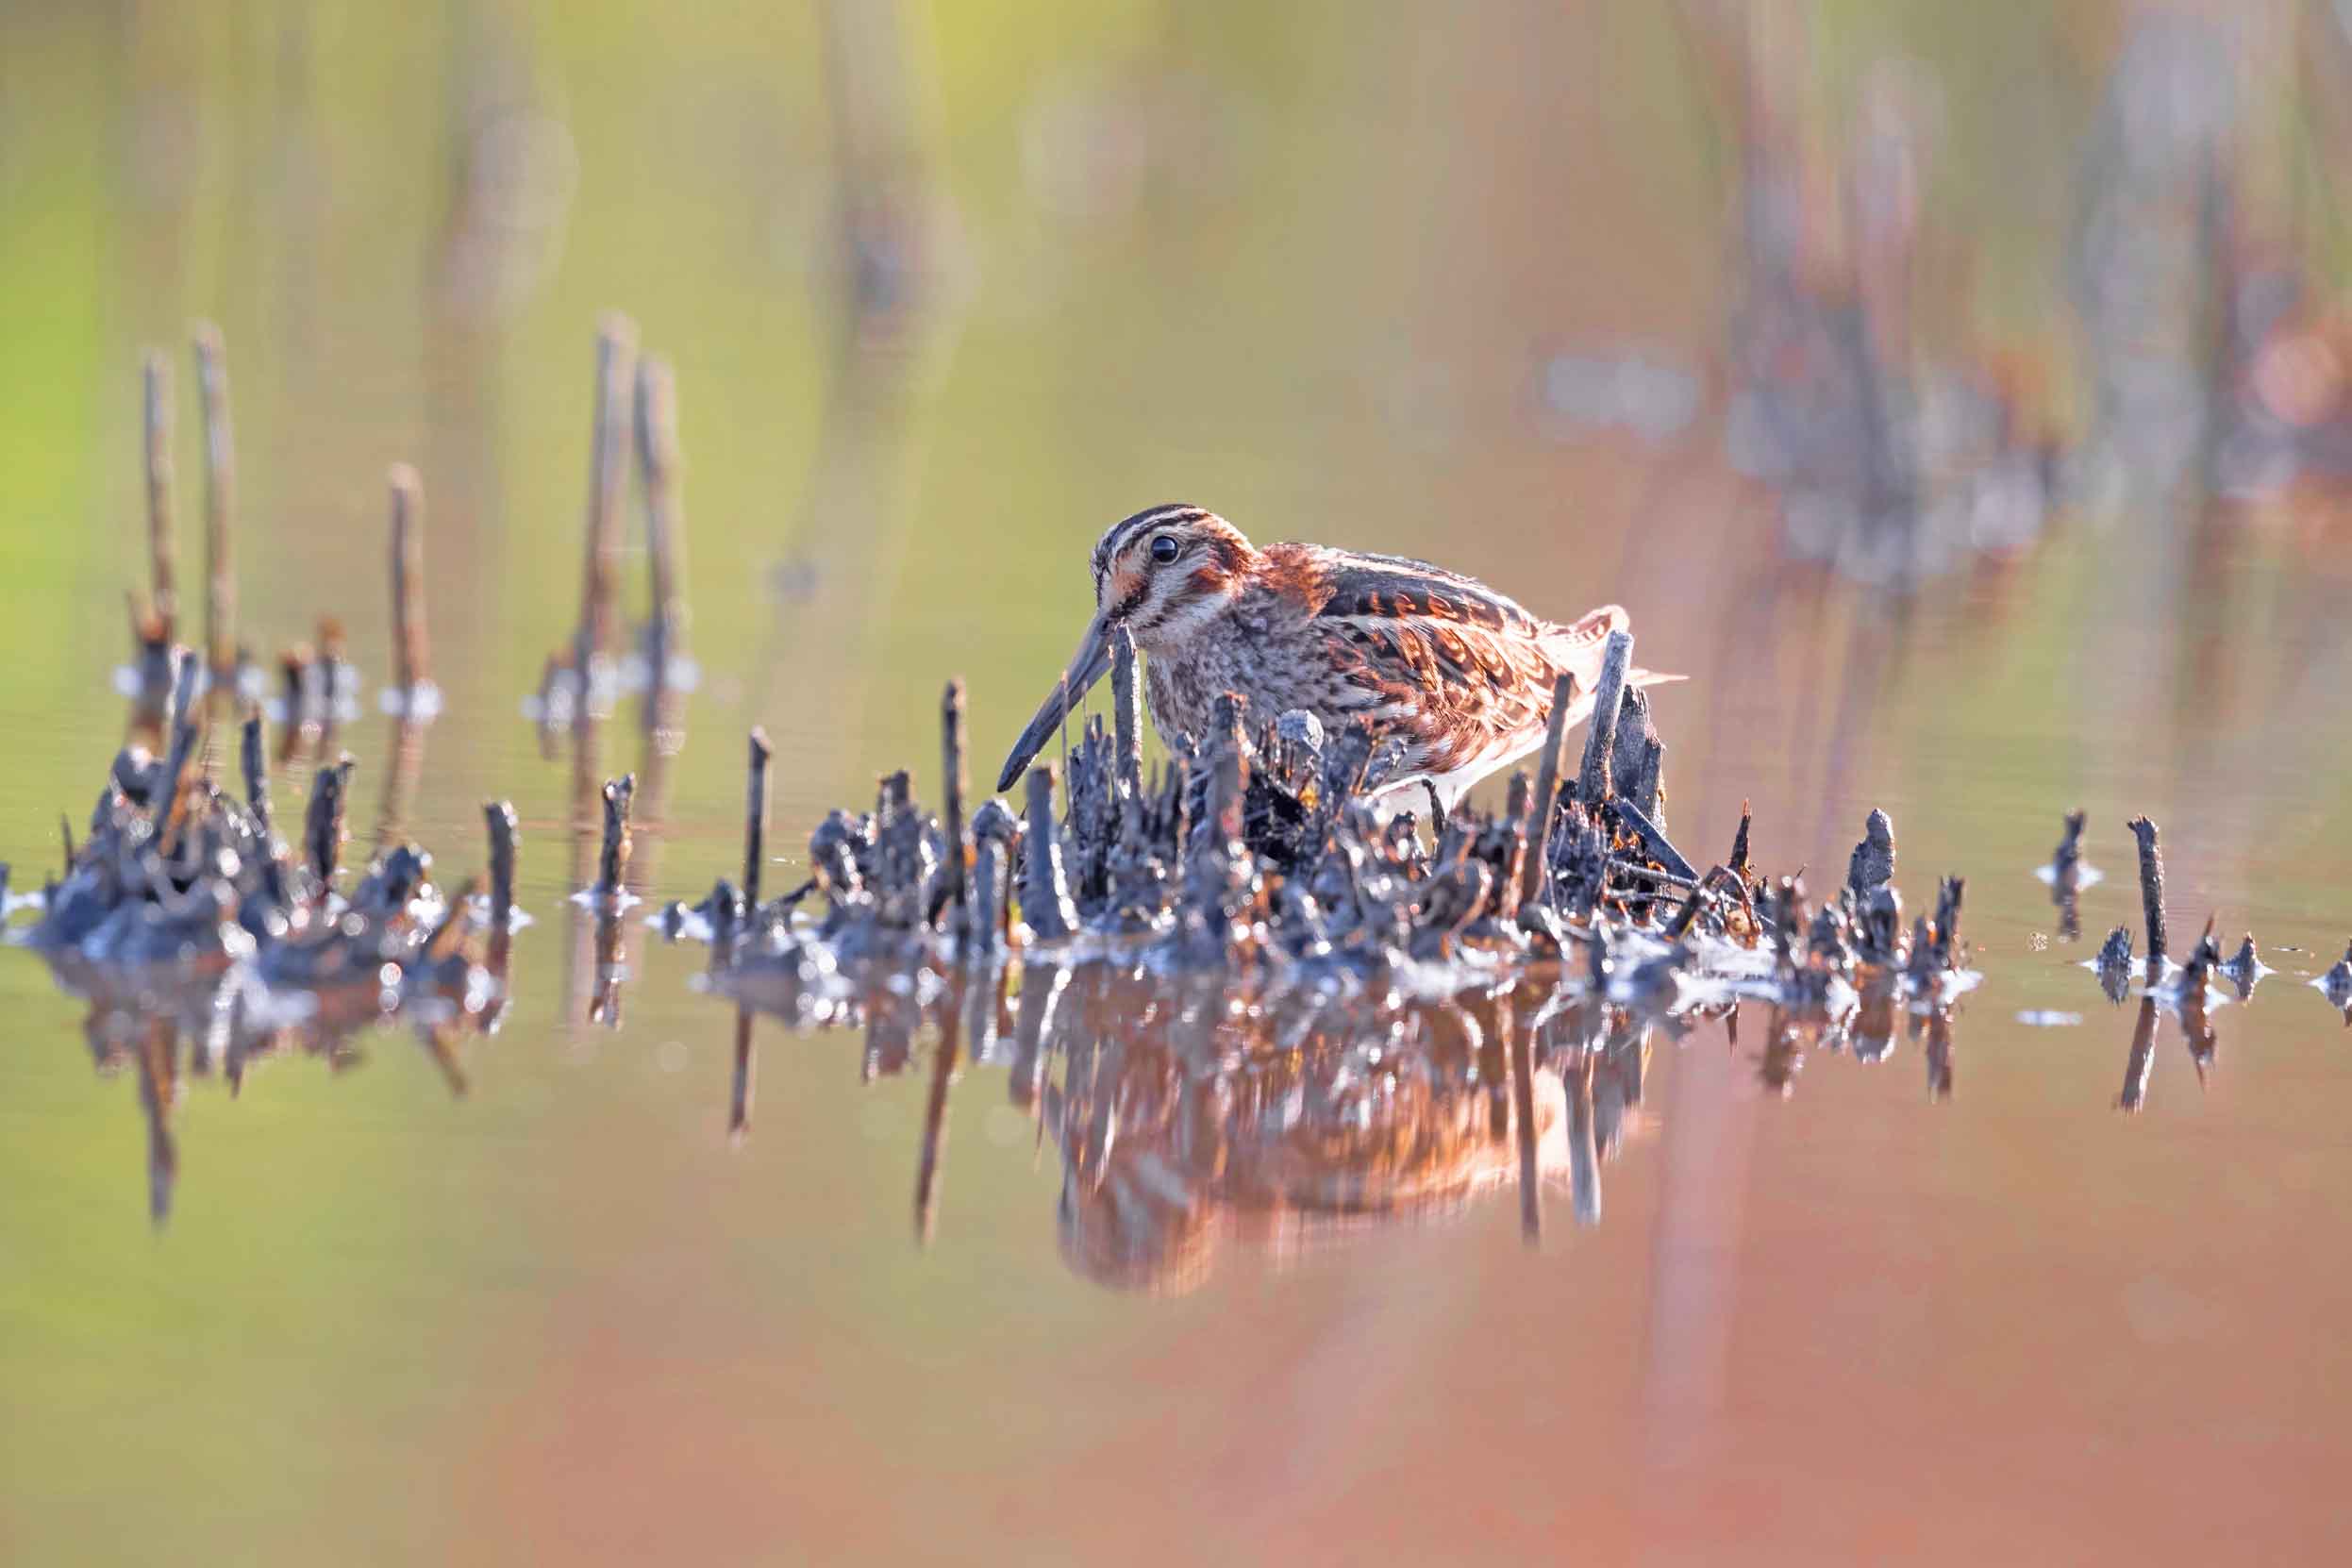 A lone Jack Snipe perched on reeds in water.